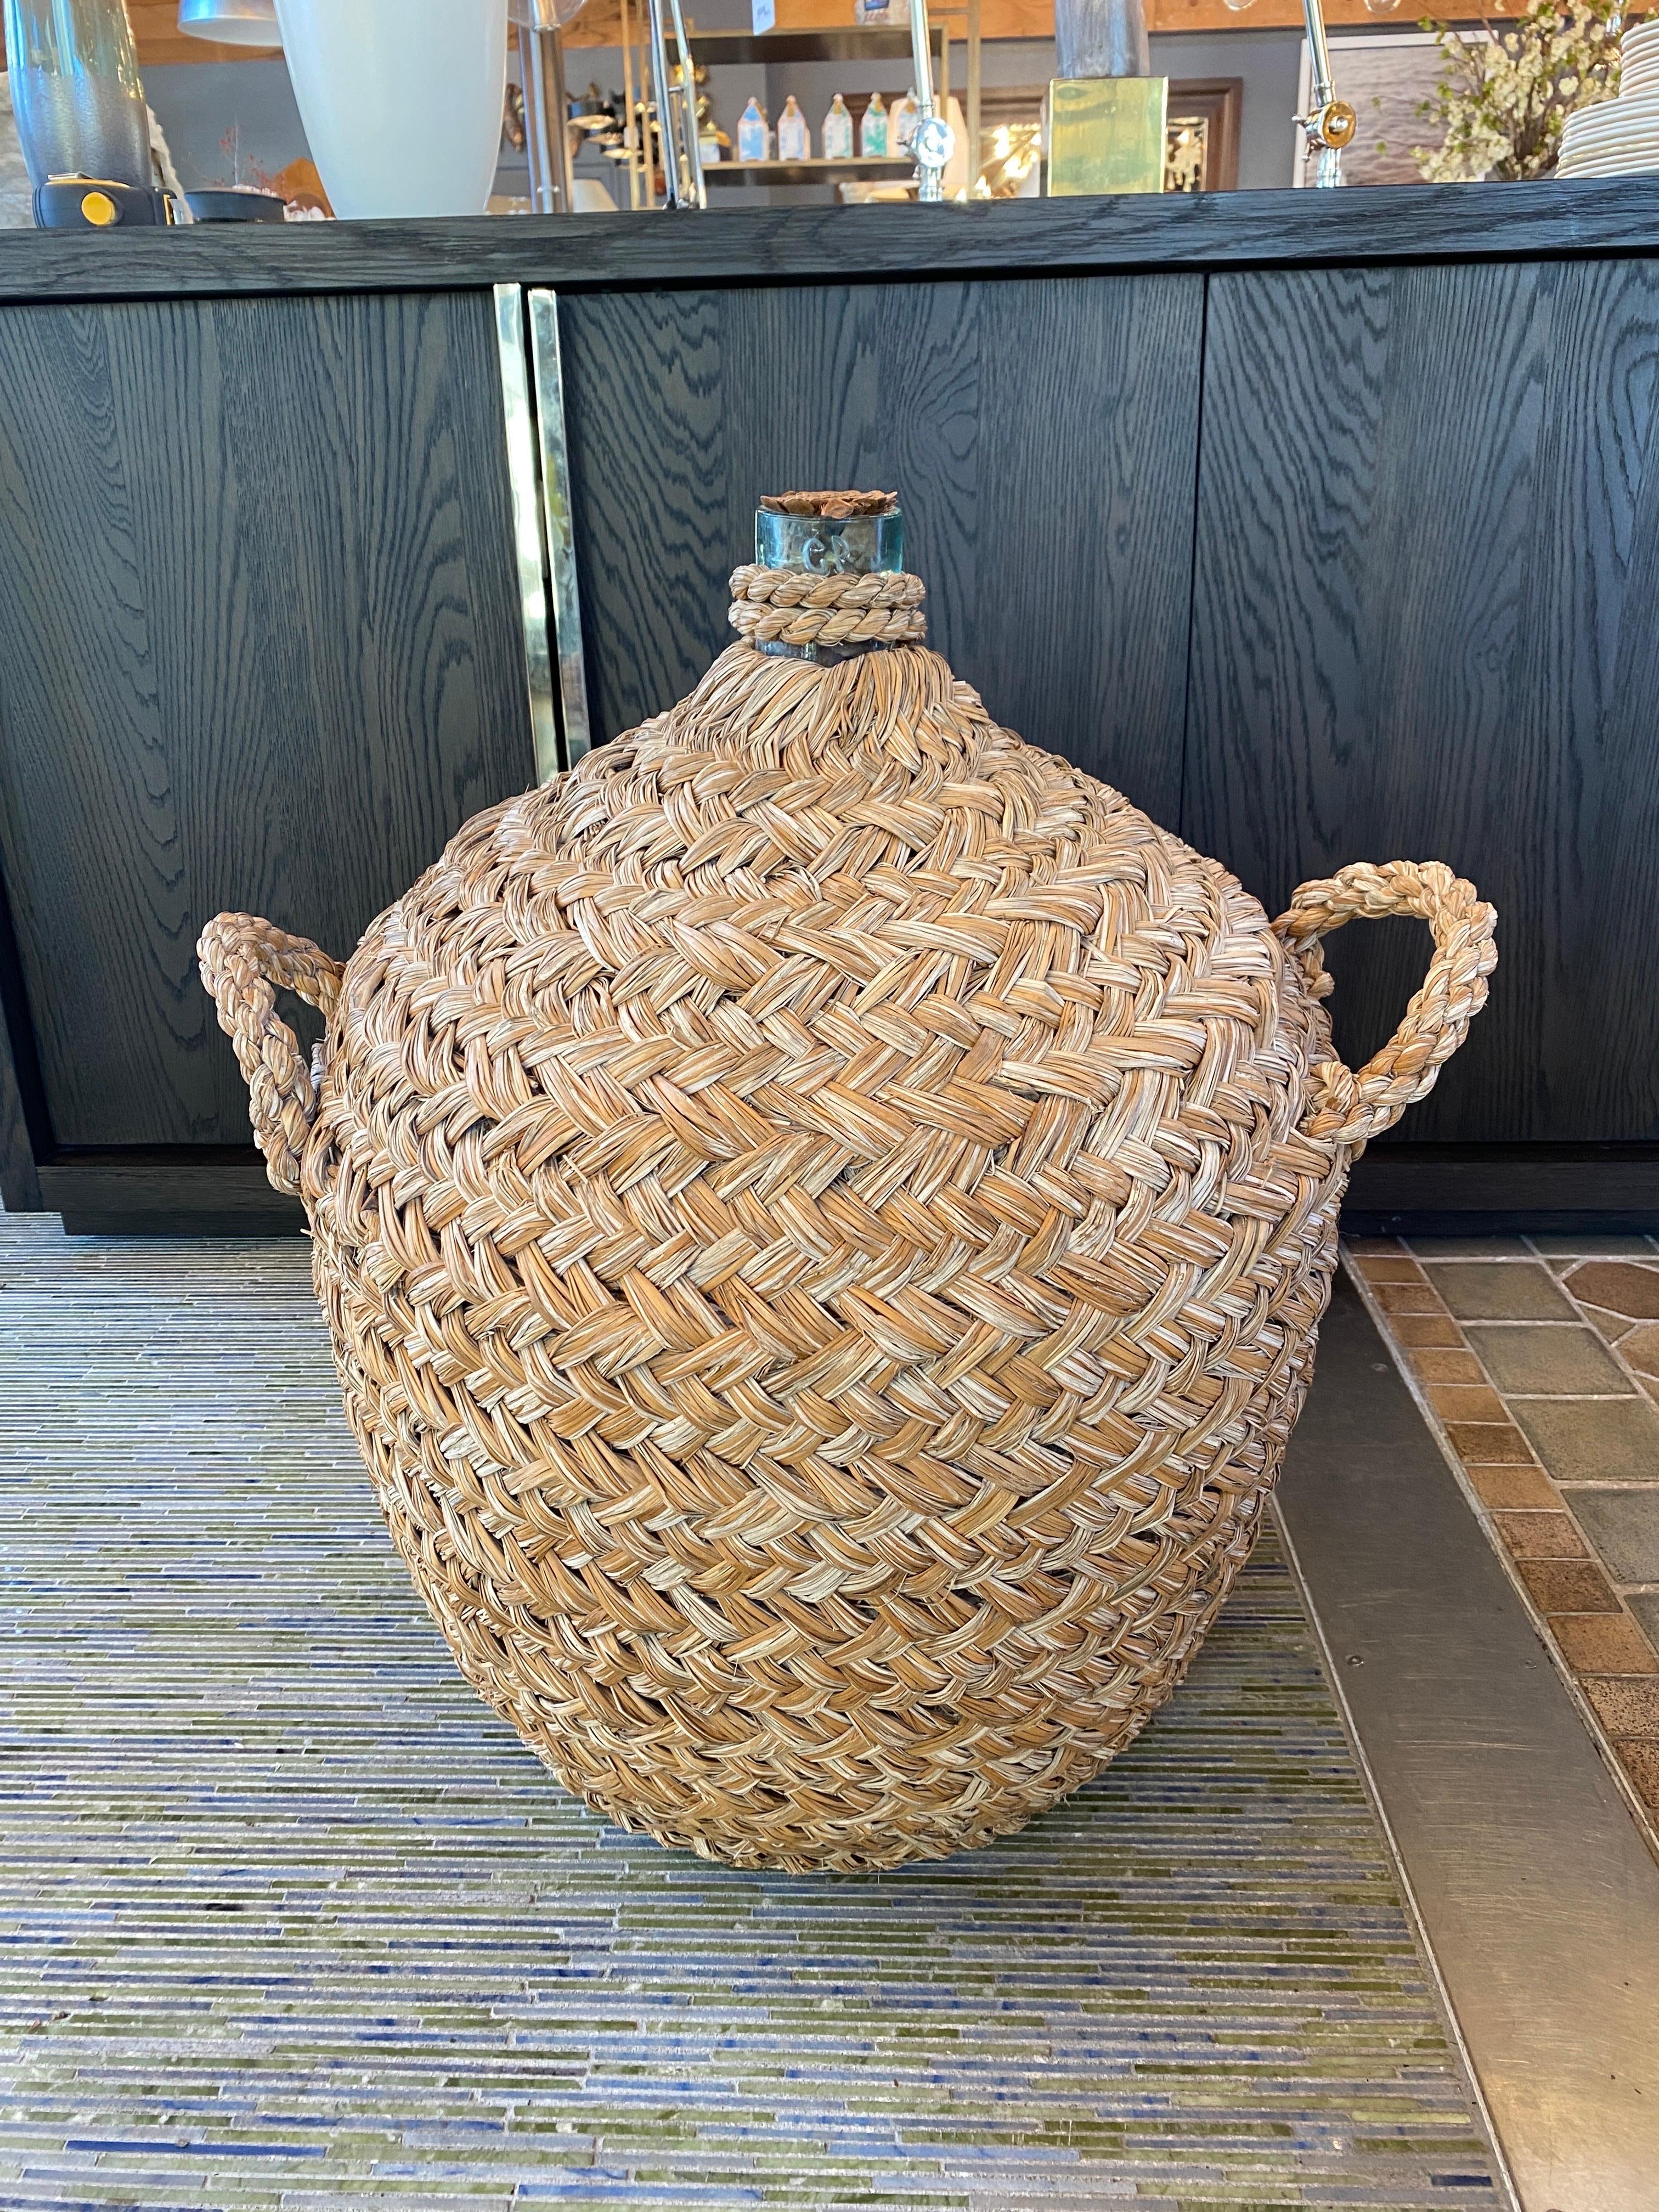 Italian woven seagrass wine bottle.

Gorgeous weave with three handles and pinecone design on top.